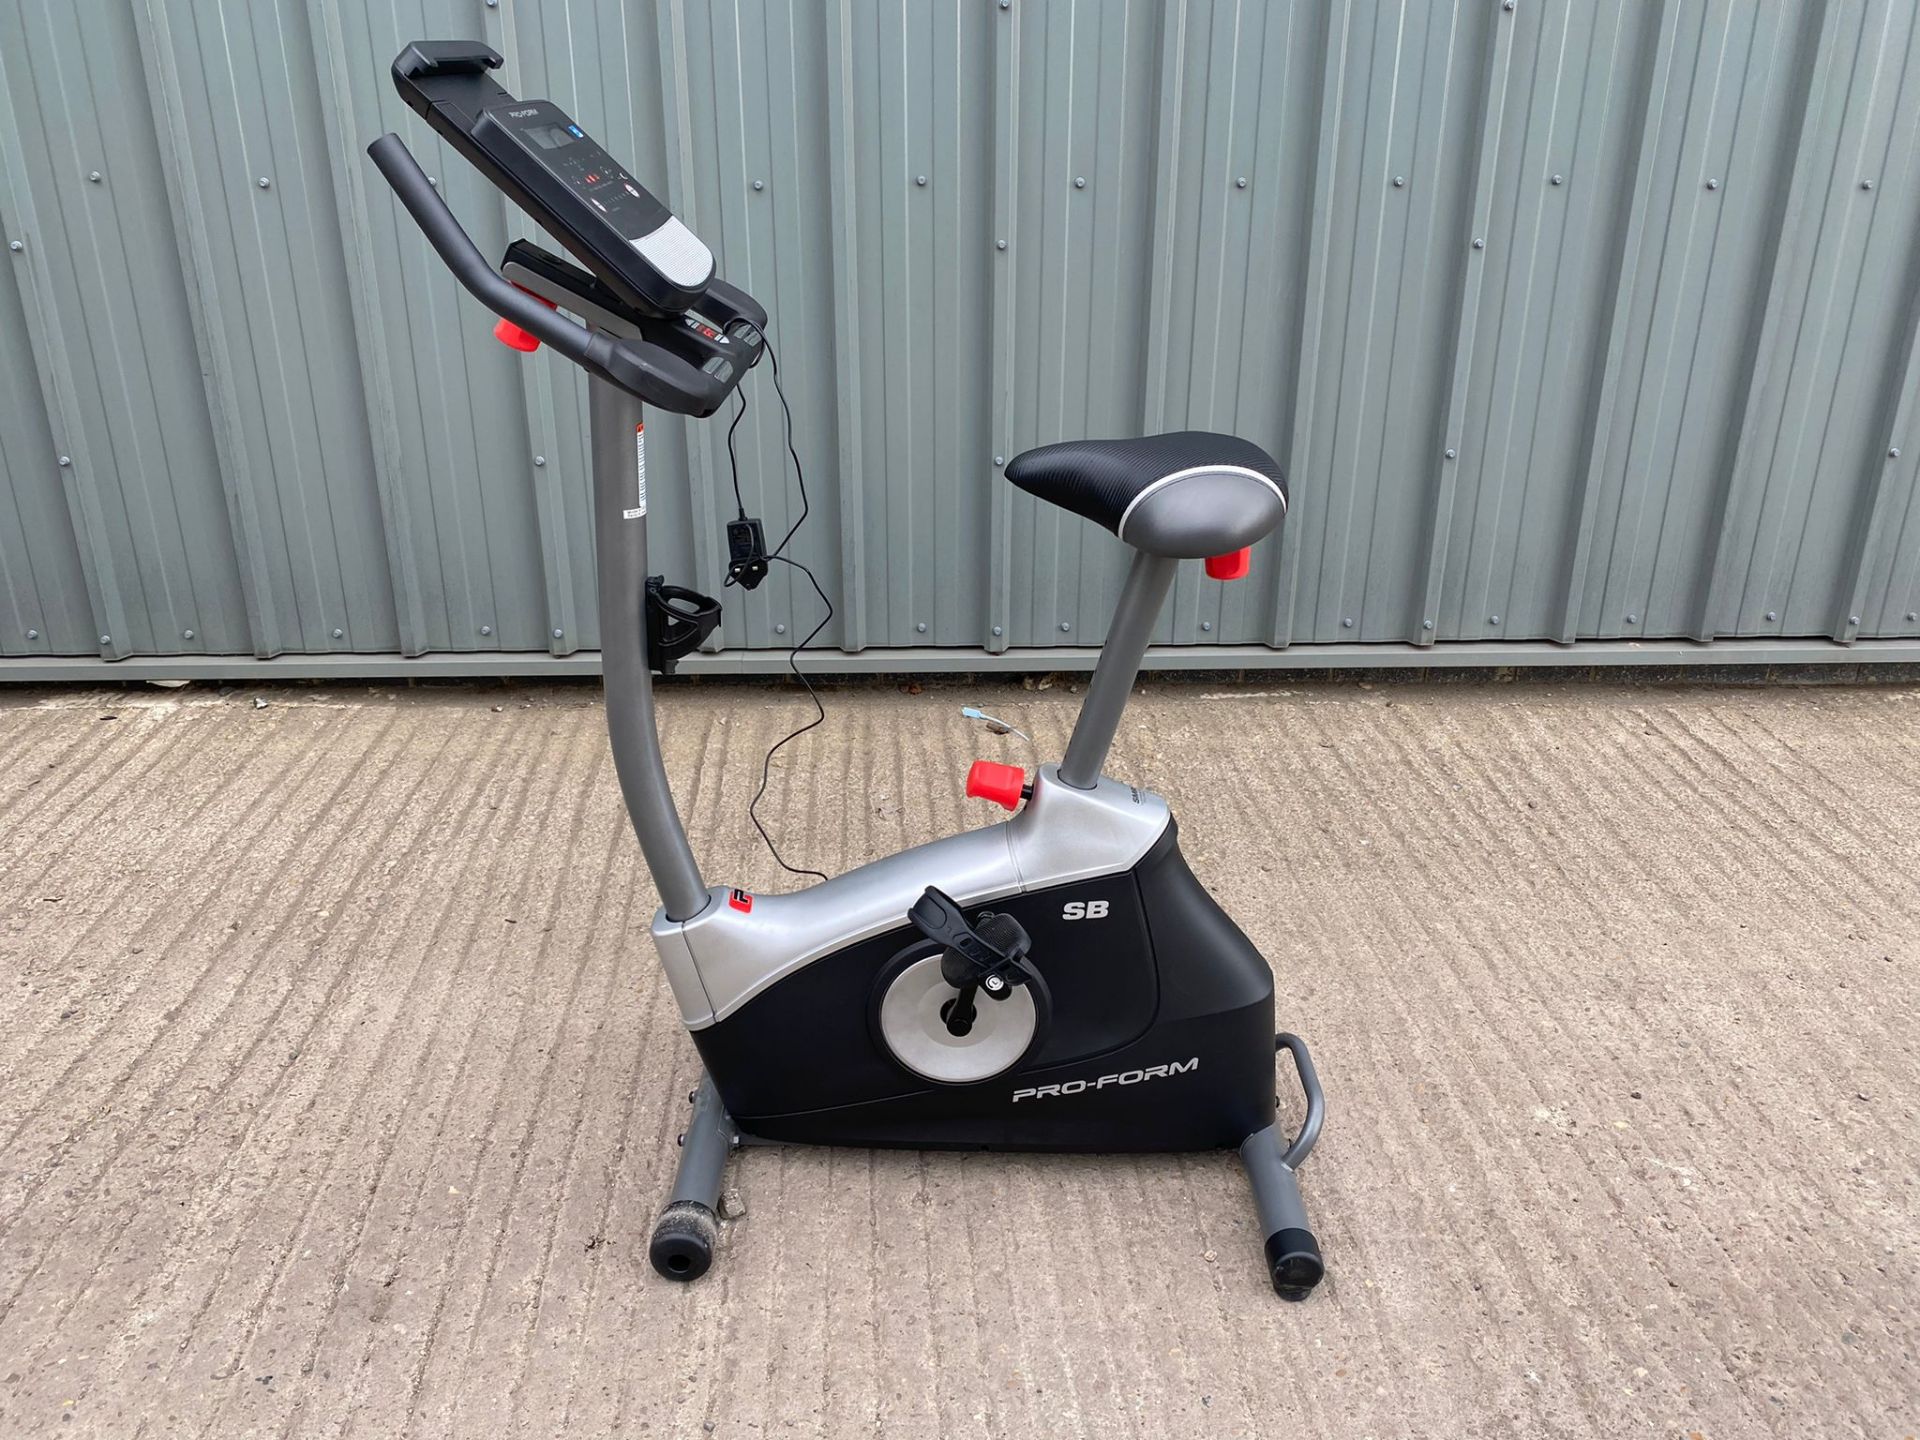 Proform sb upright bike *PLUS VAT*   COLLECTION FROM TUXFORD